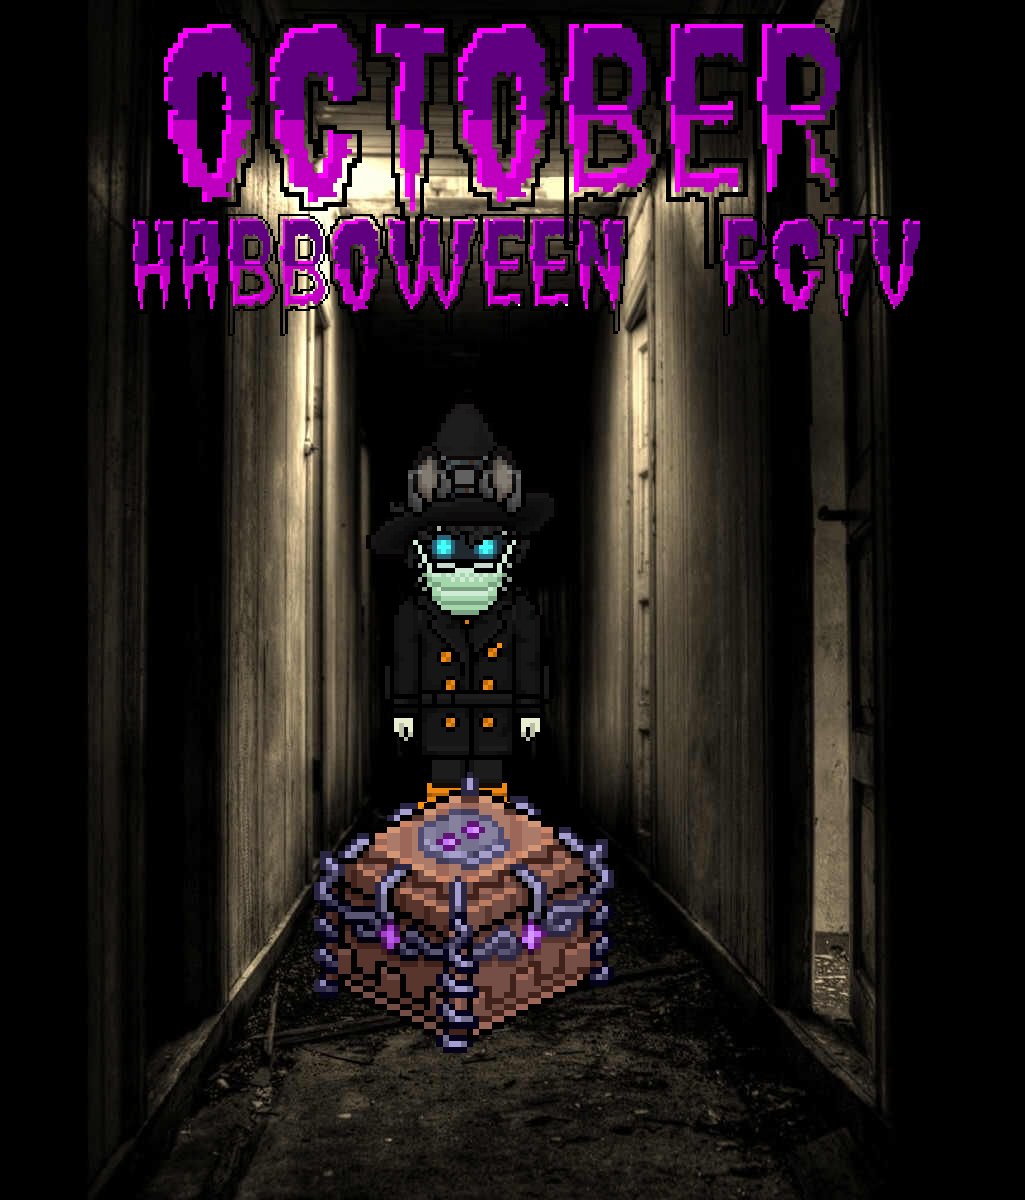 GIVEAWAY TIME!Want to win yourself a cursed Pandora's box?FollowRe-tweetEnds October 11th http://Habbo.com  only #Habbo  #Habboween